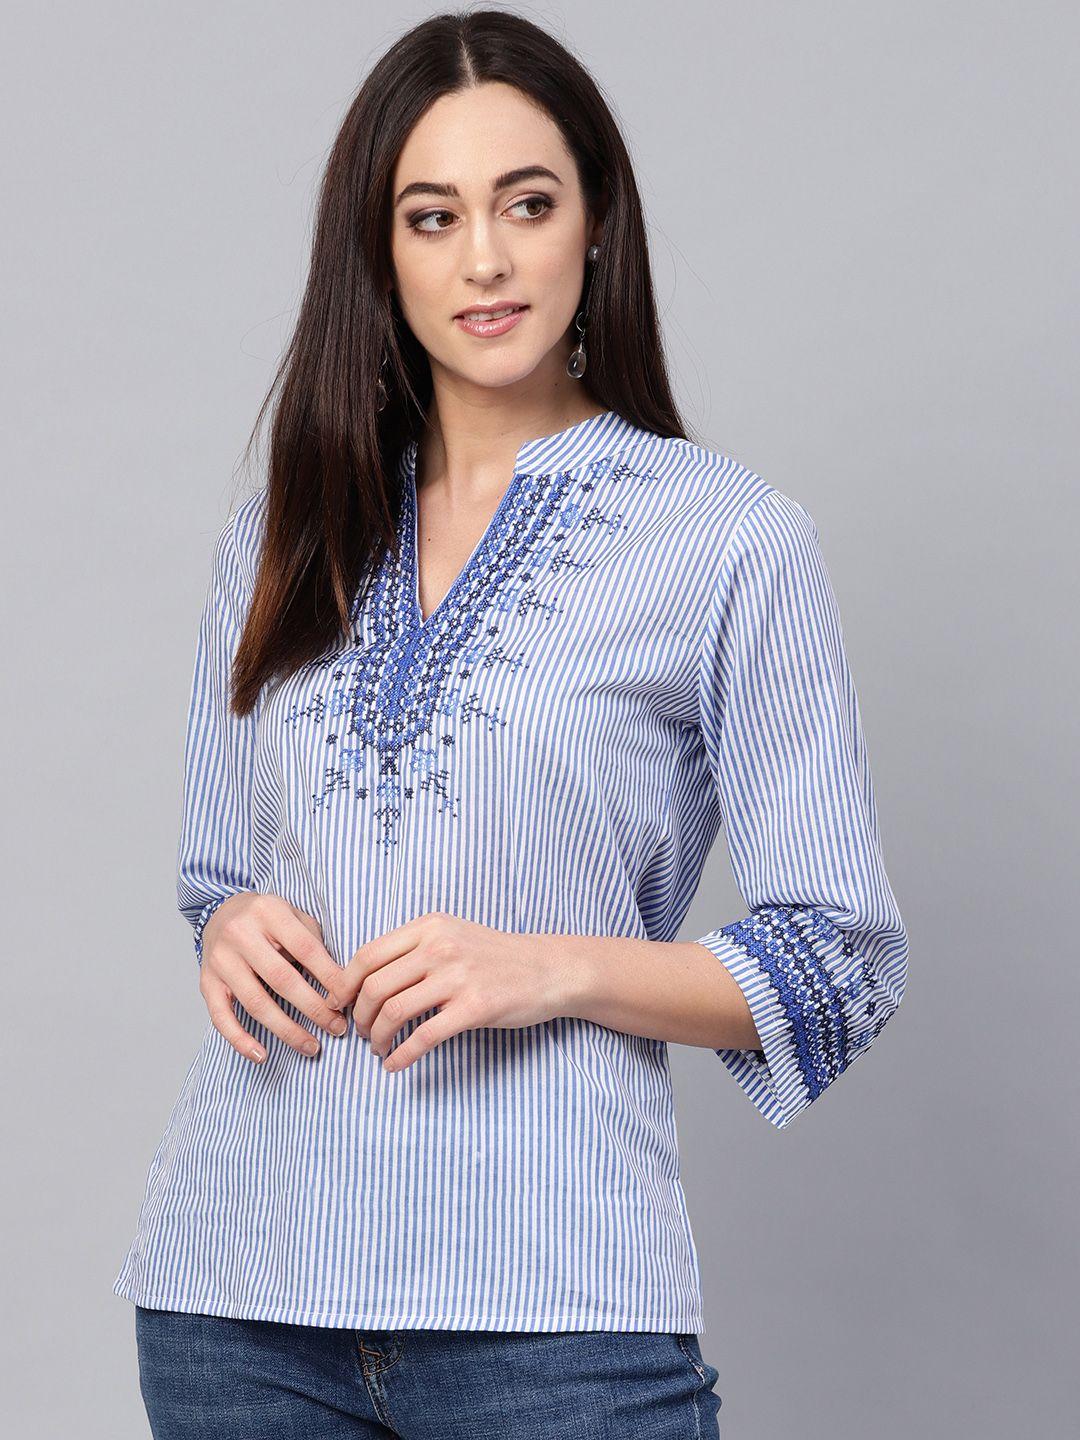 bhama couture women blue and white striped pure cotton top